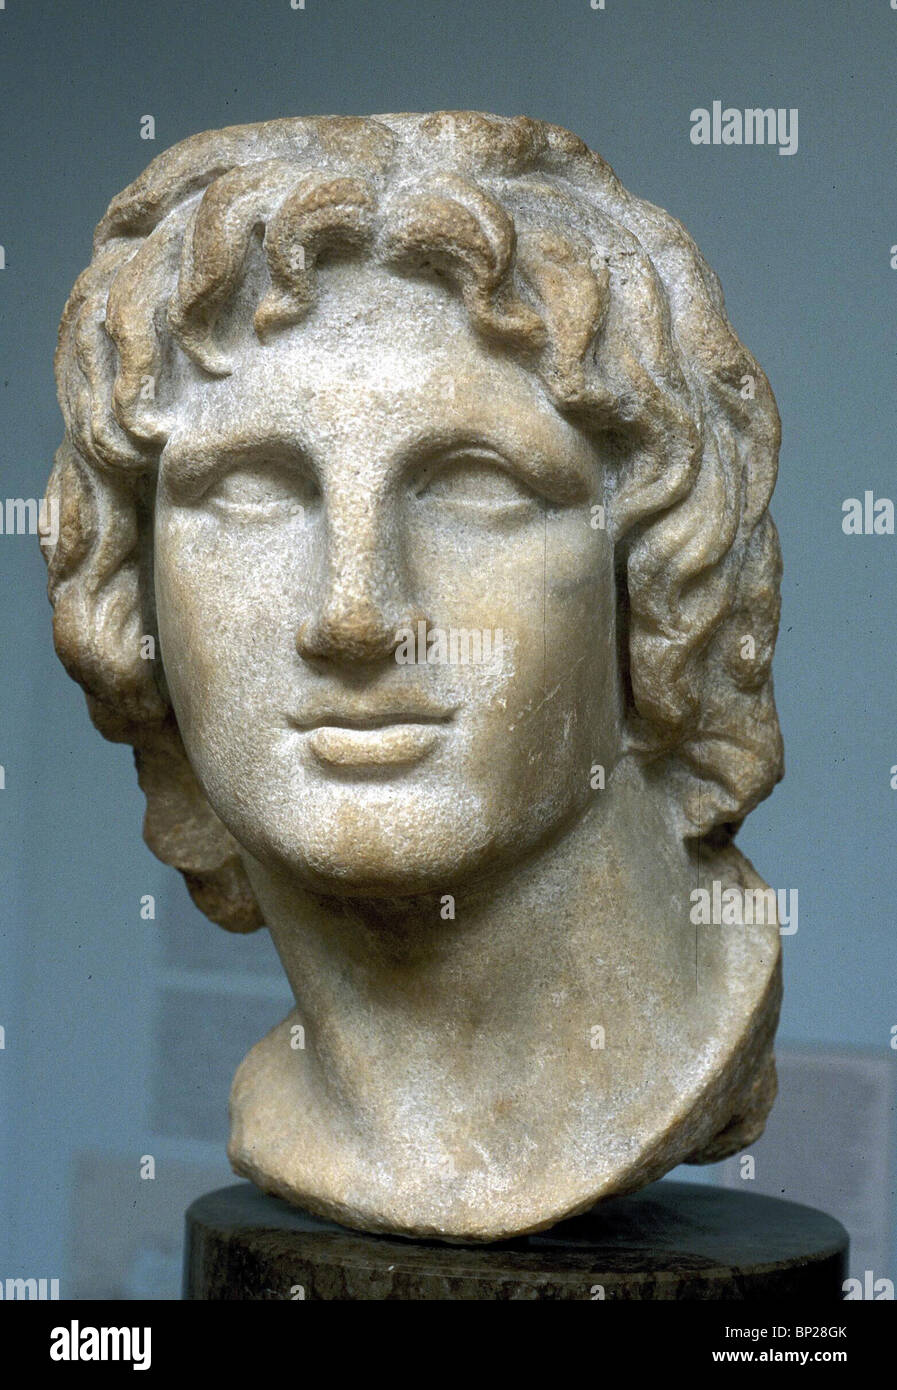 2175. MARBLE BUST OF ALEXANDER THE GREAT Stock Photo